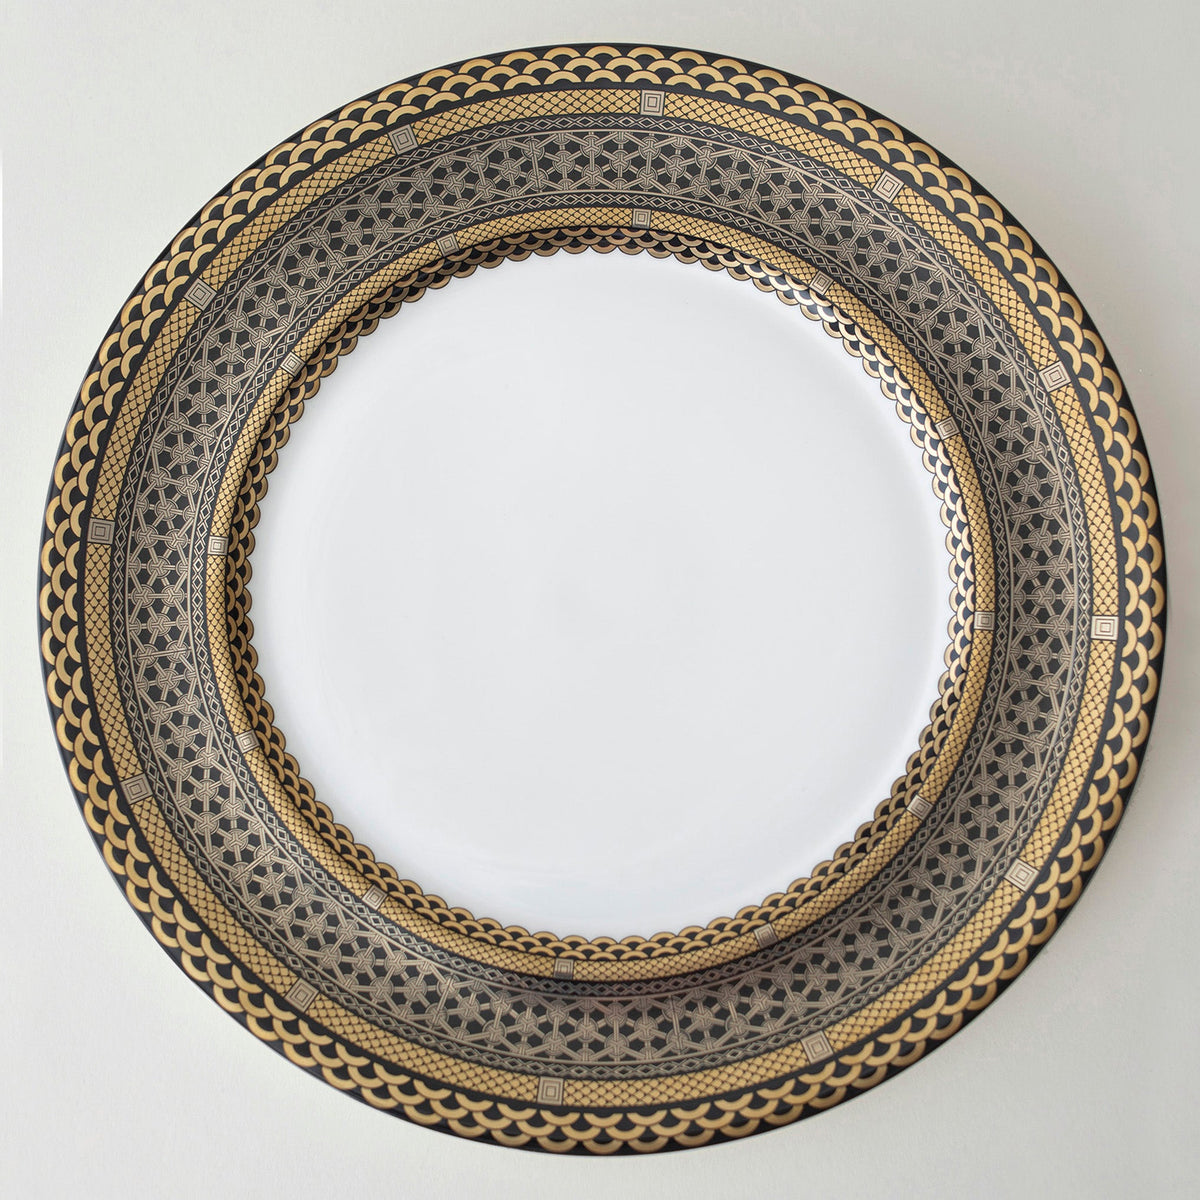 A Hawthorne Onyx Gold &amp; Platinum Charger Plate with a luxurious gold border made by Caskata Artisanal Home.